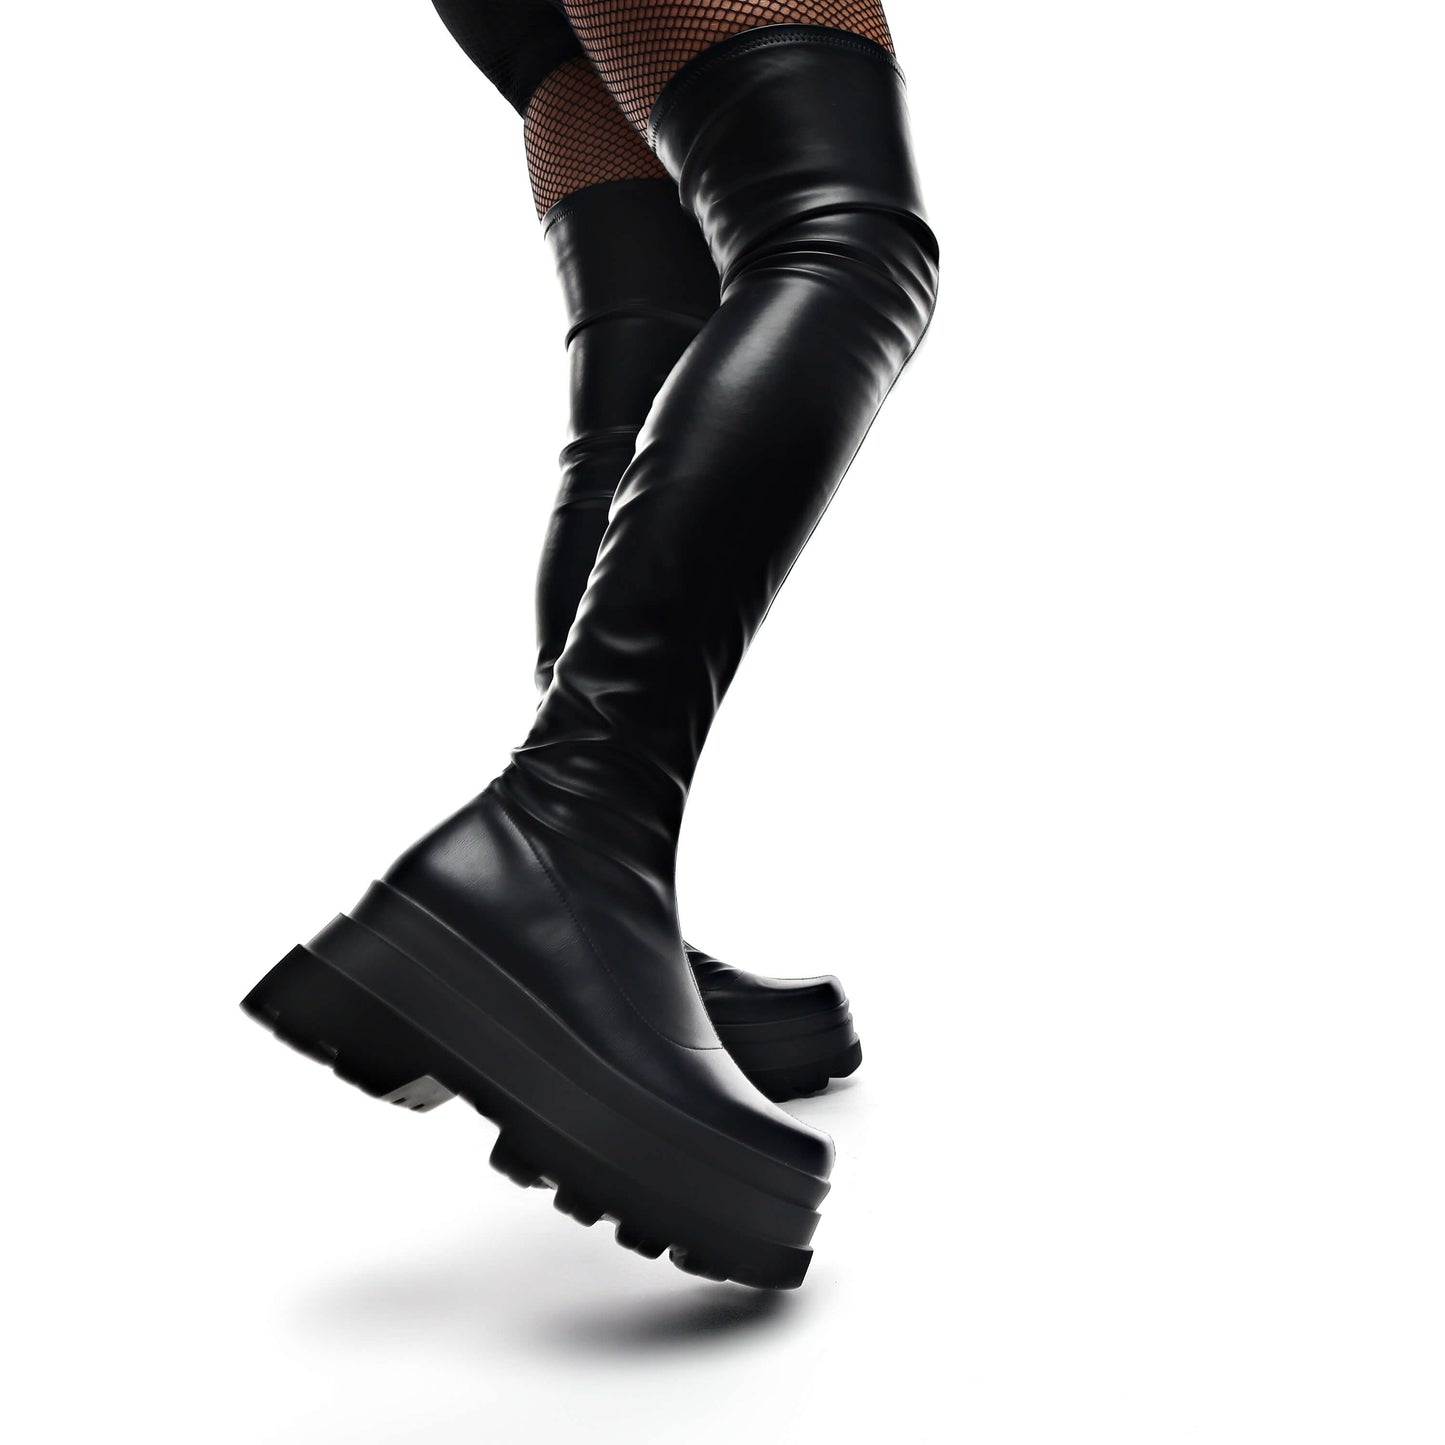 The Elevation Plus Size Thigh High Boots - Long Boots - KOI Footwear - Black - Model Sole View